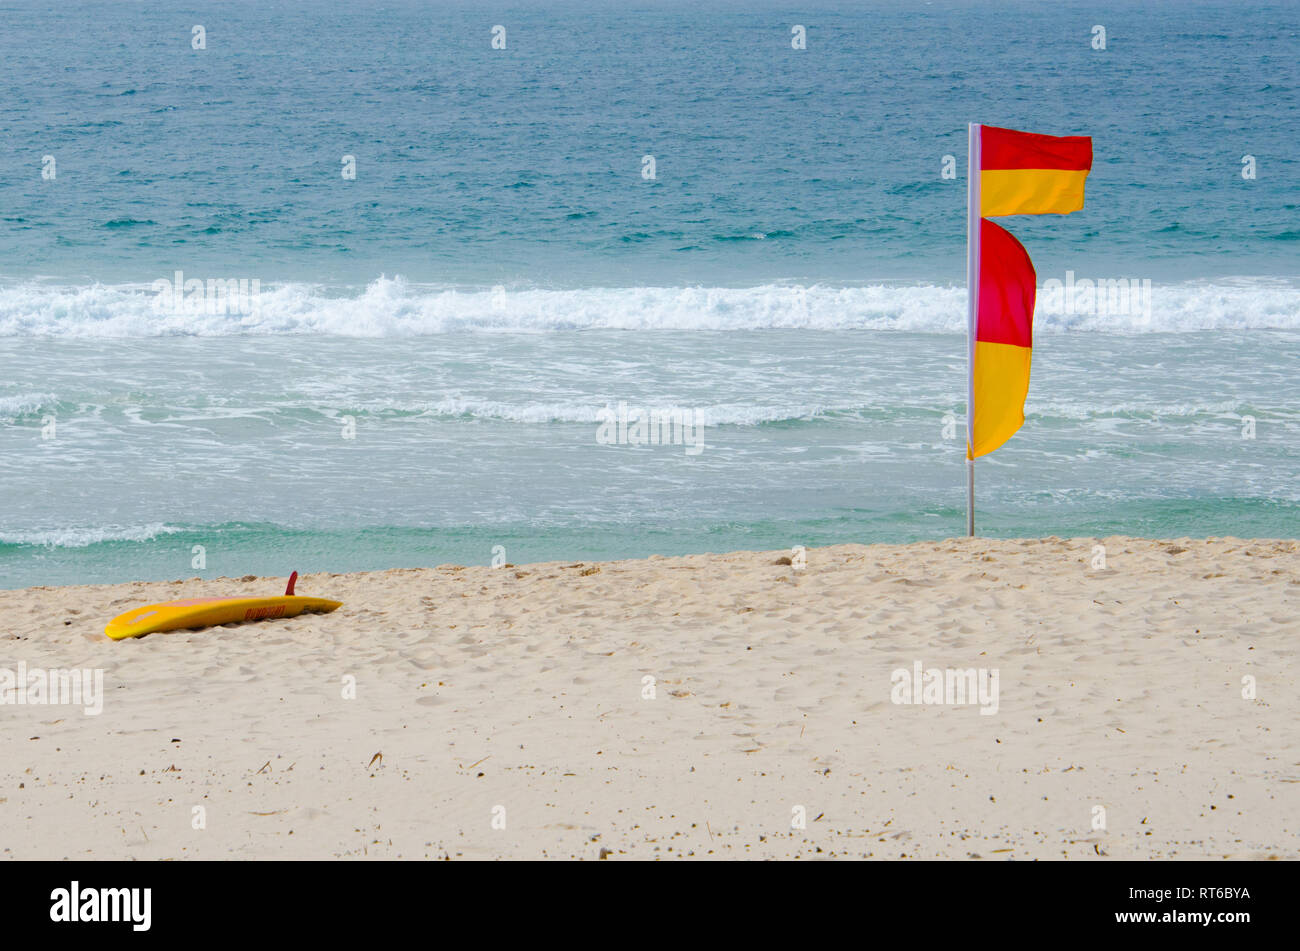 Summer safety between the surf lifesavers flags on Australian beaches. Stock Photo